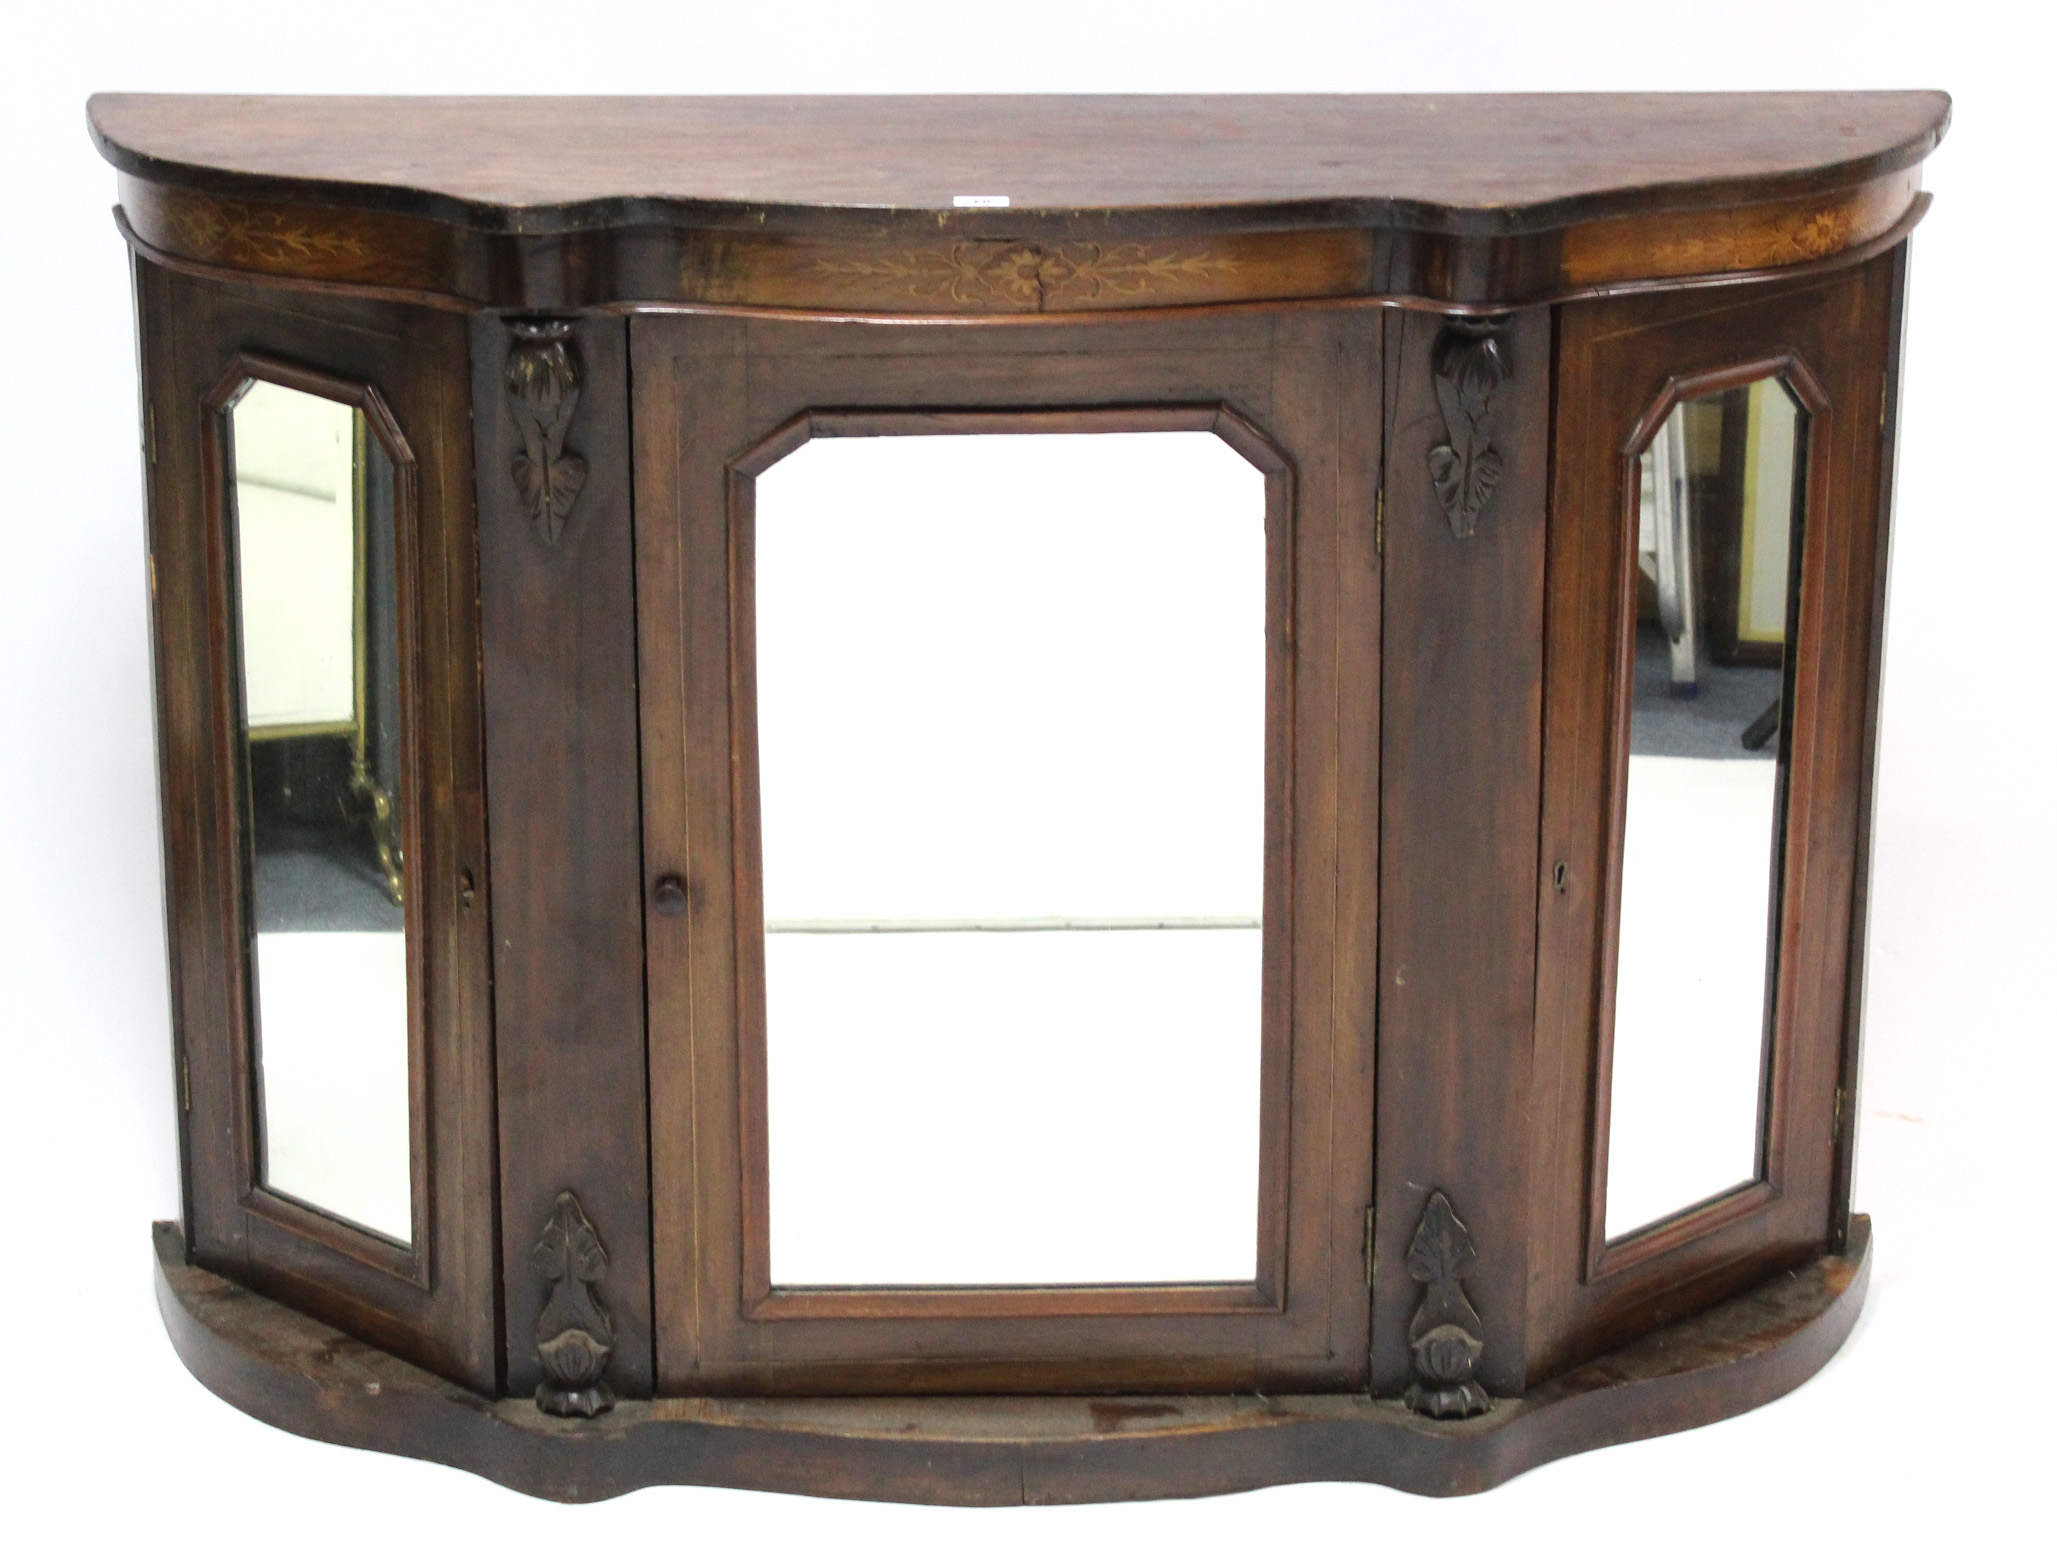 A 19th century marquetry-inlaid serpentine-front cabinet enclosed by three mirror doors, & on shaped